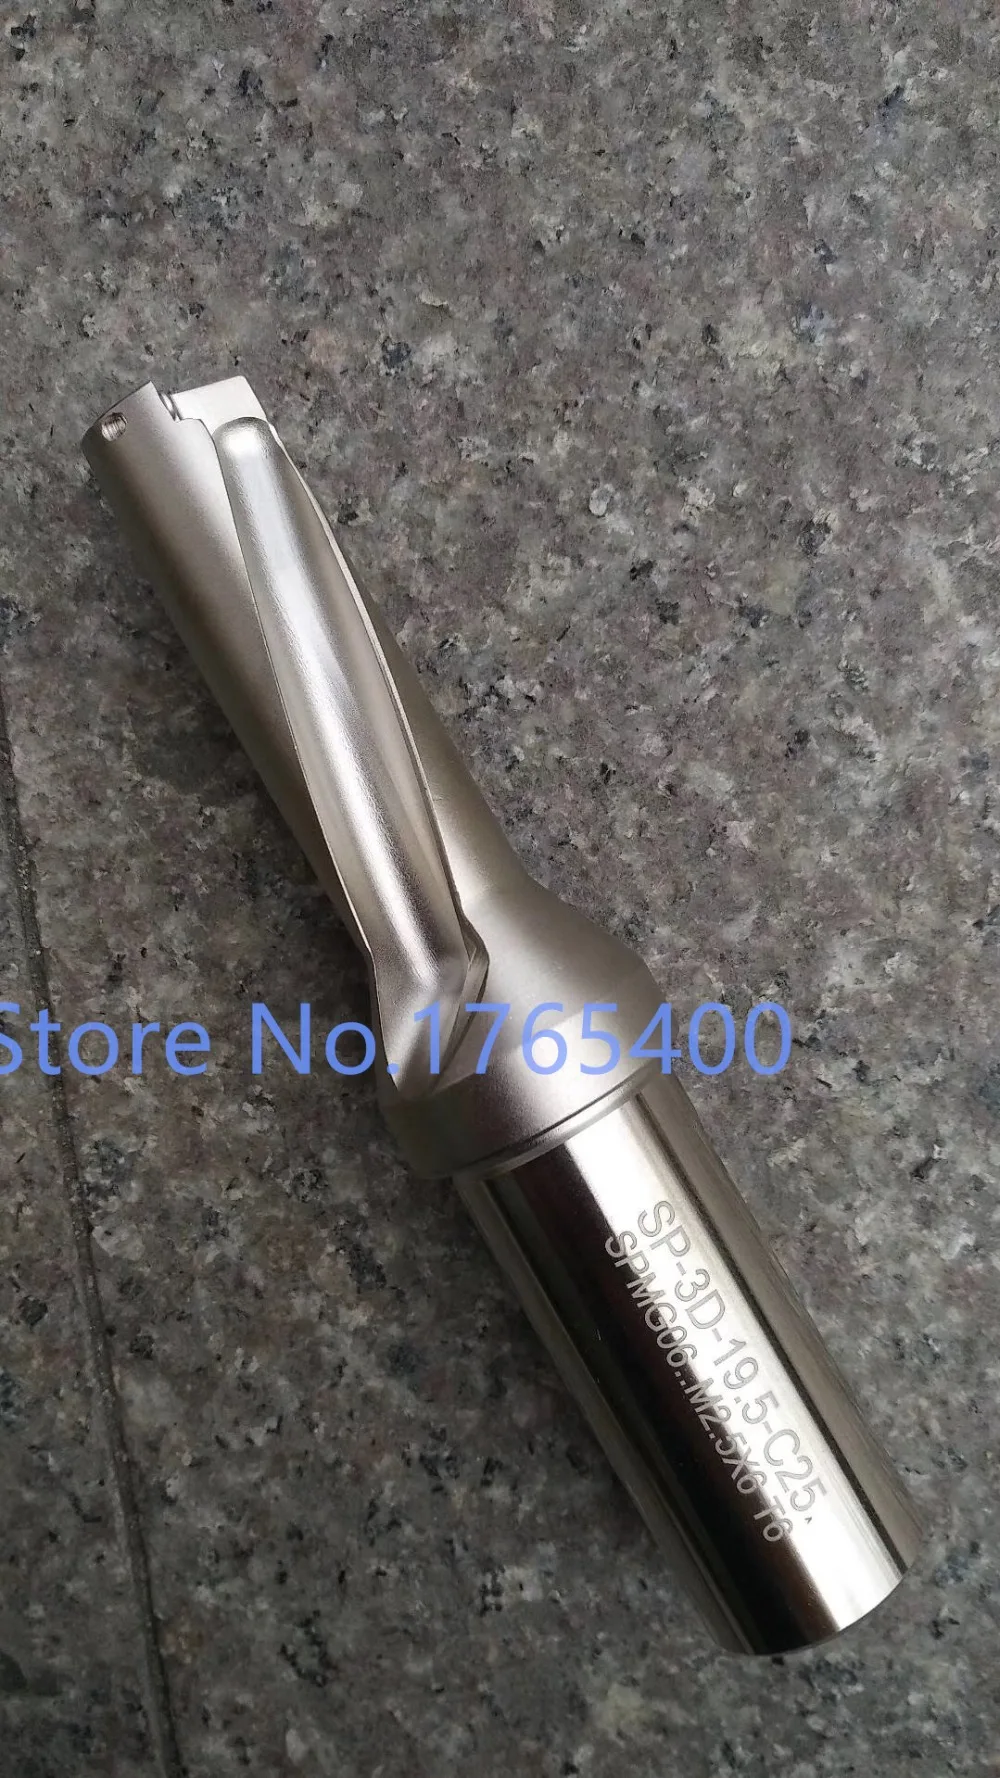 18mm-3D with+2PCS SPMG060204 1P C25-3D18-57SP06 U drill/ indexable drill 